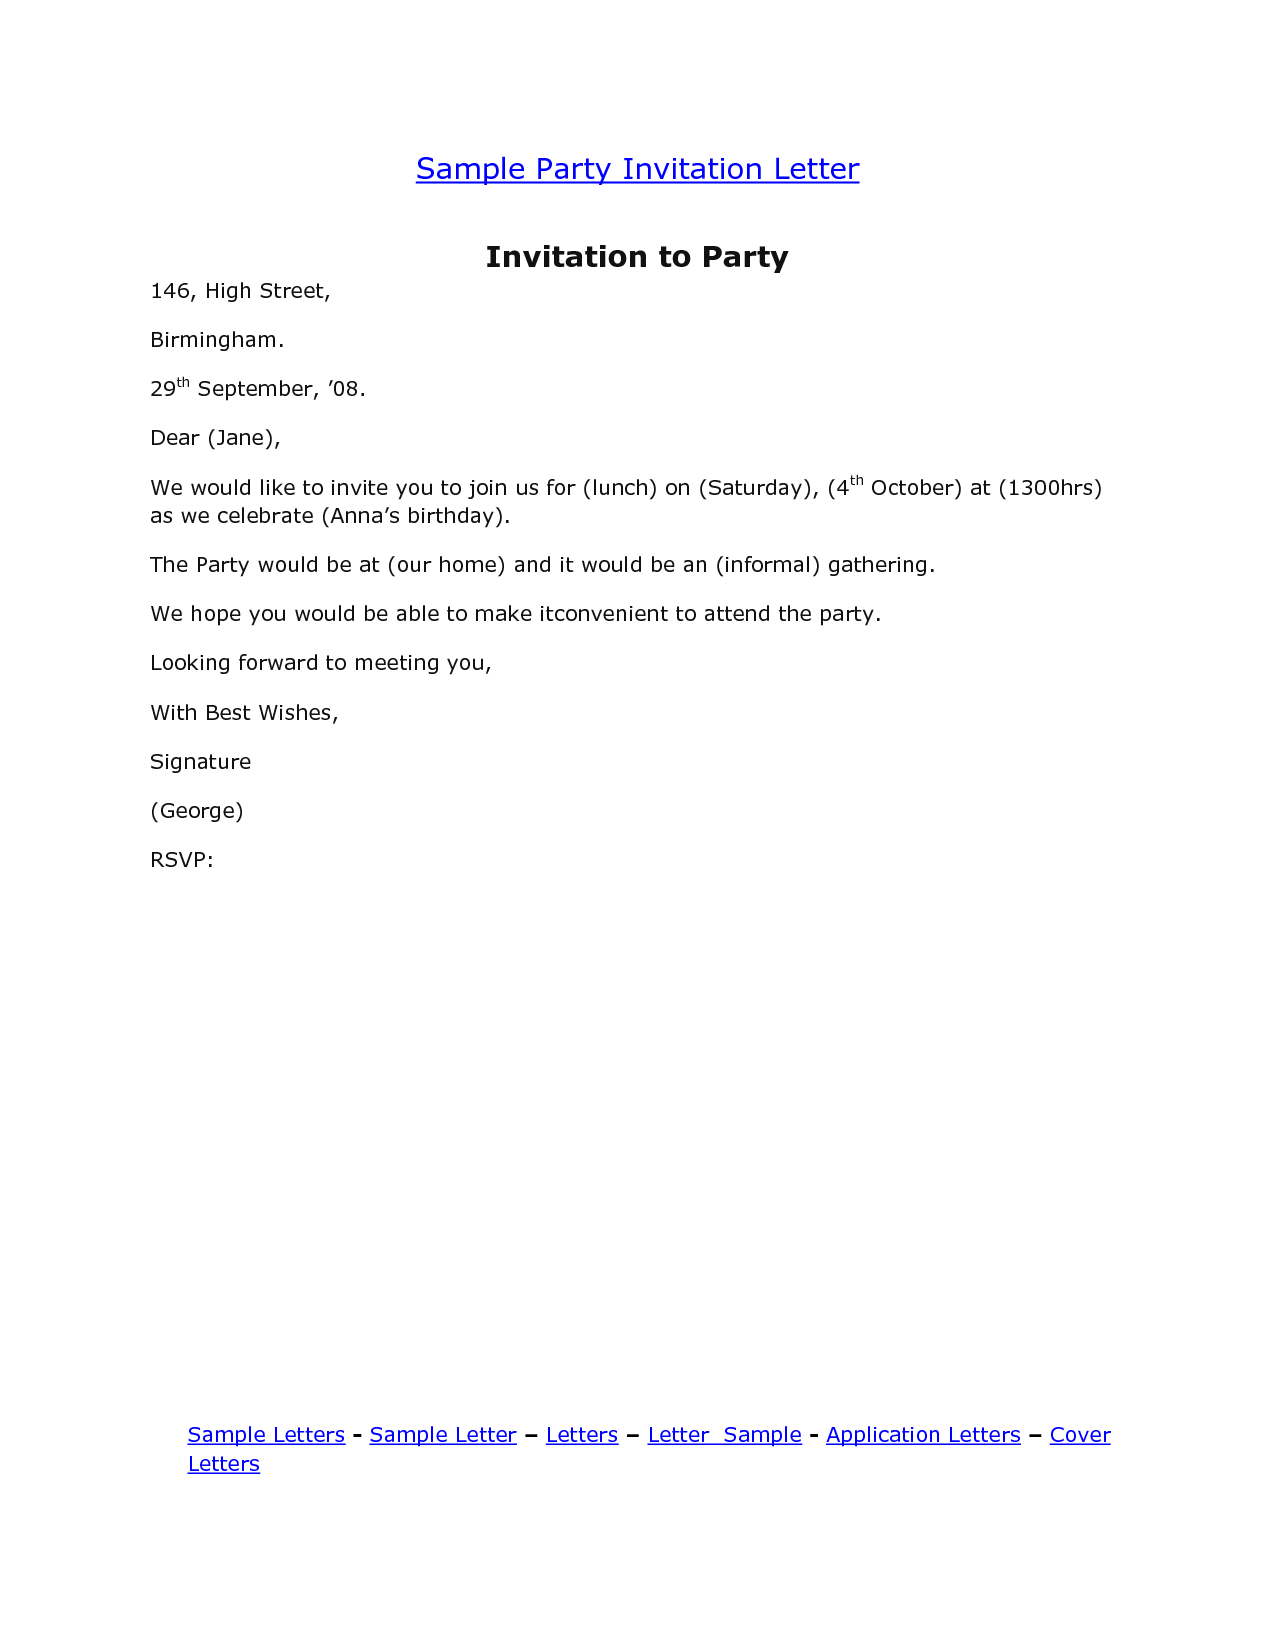 email-party-invitation-template-business-template-ideas